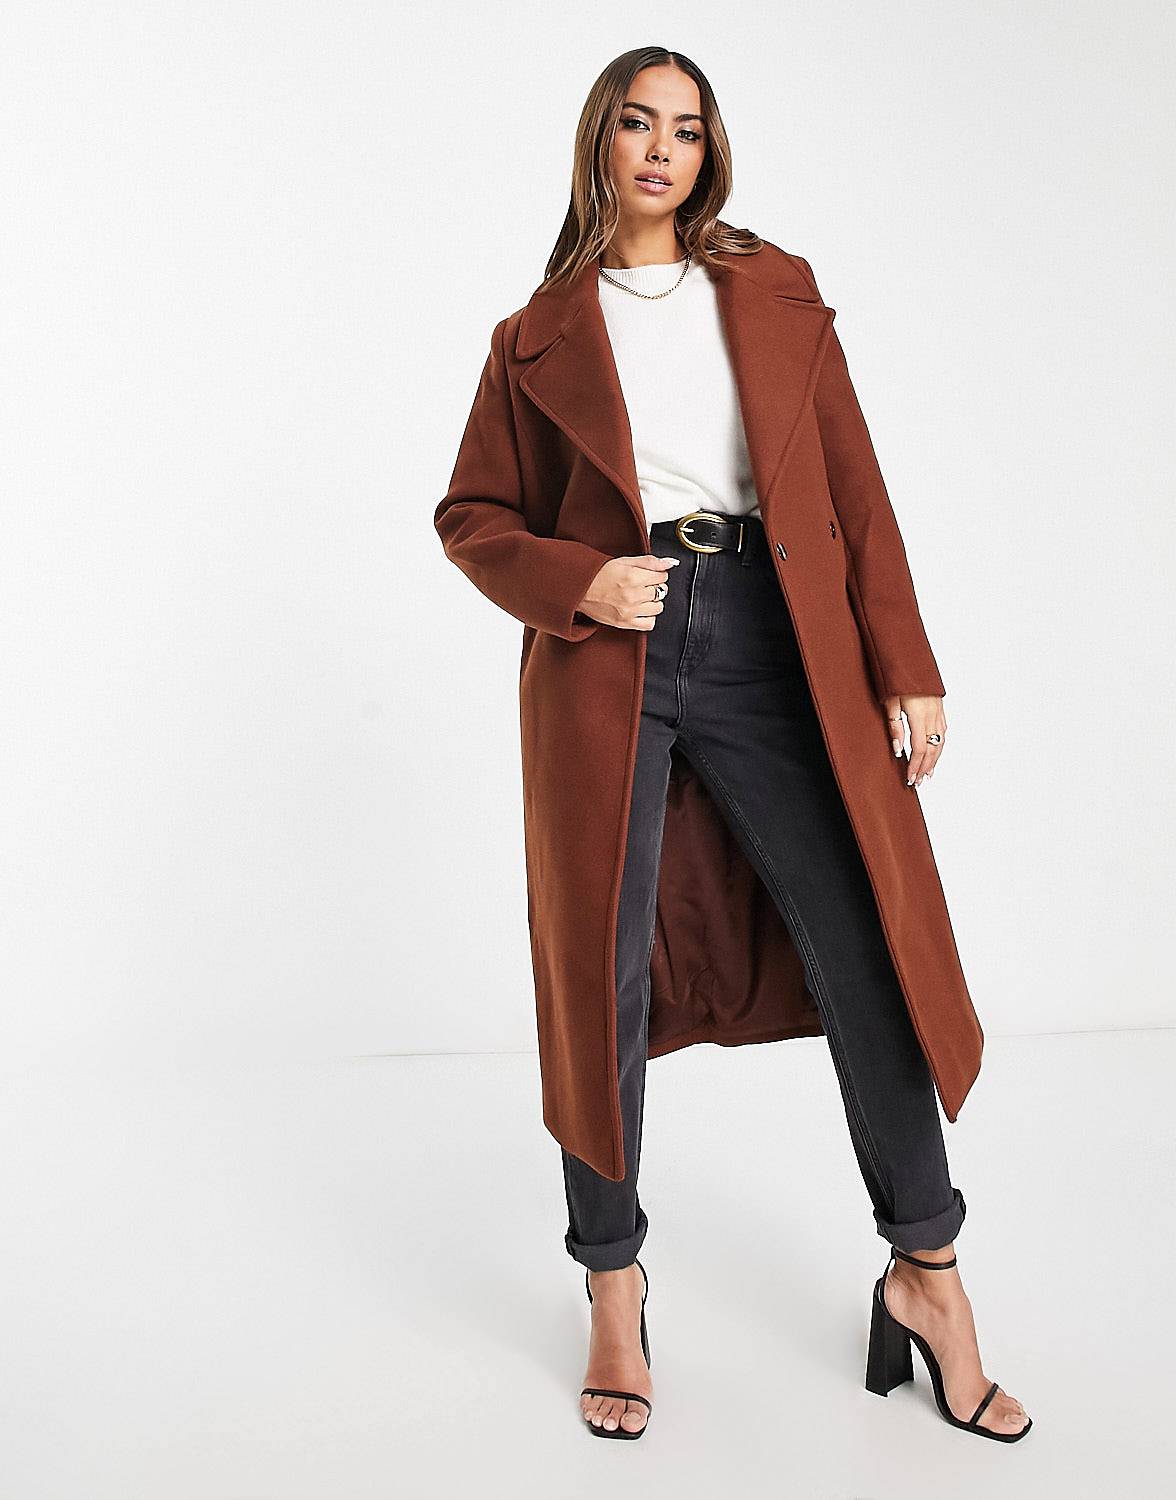 Brick Belted Wrap Midi Tailored Coat from Forever New.